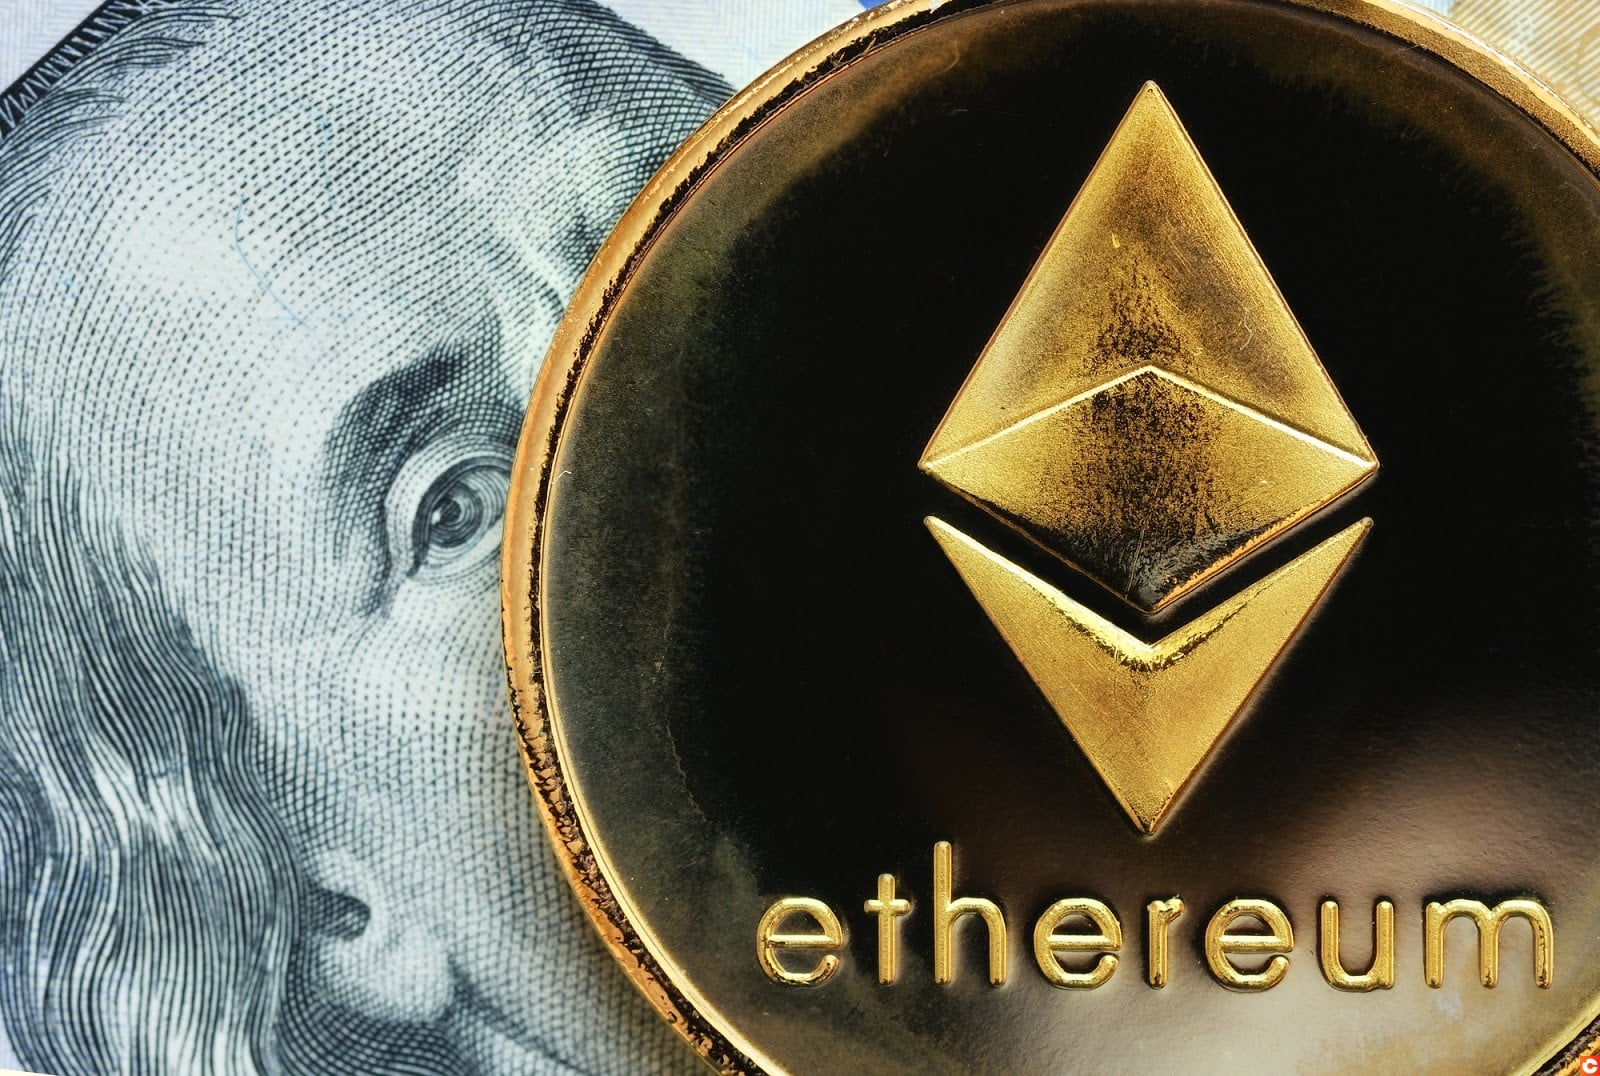 How Do I Earn Ether (ETH) Without an Upfront Investment?